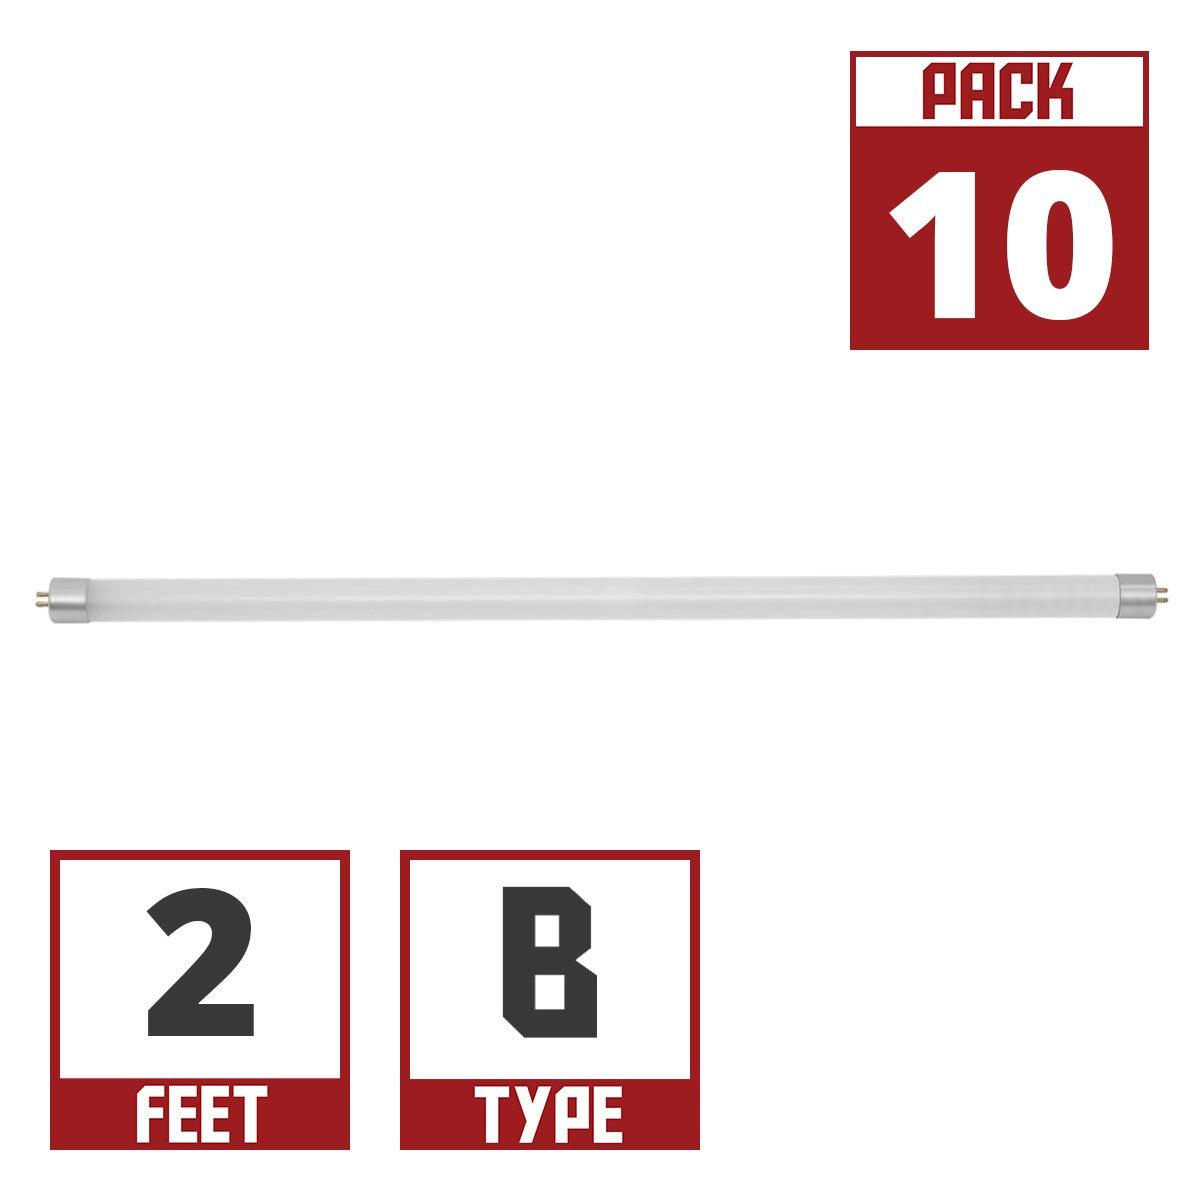 21 Inch LED mini T5 Tube, 7 Watt, 700 Lumens, 4000K, F13T5 Replacement, Ballast Bypass, Double End, G5 Base (Case Of 10)